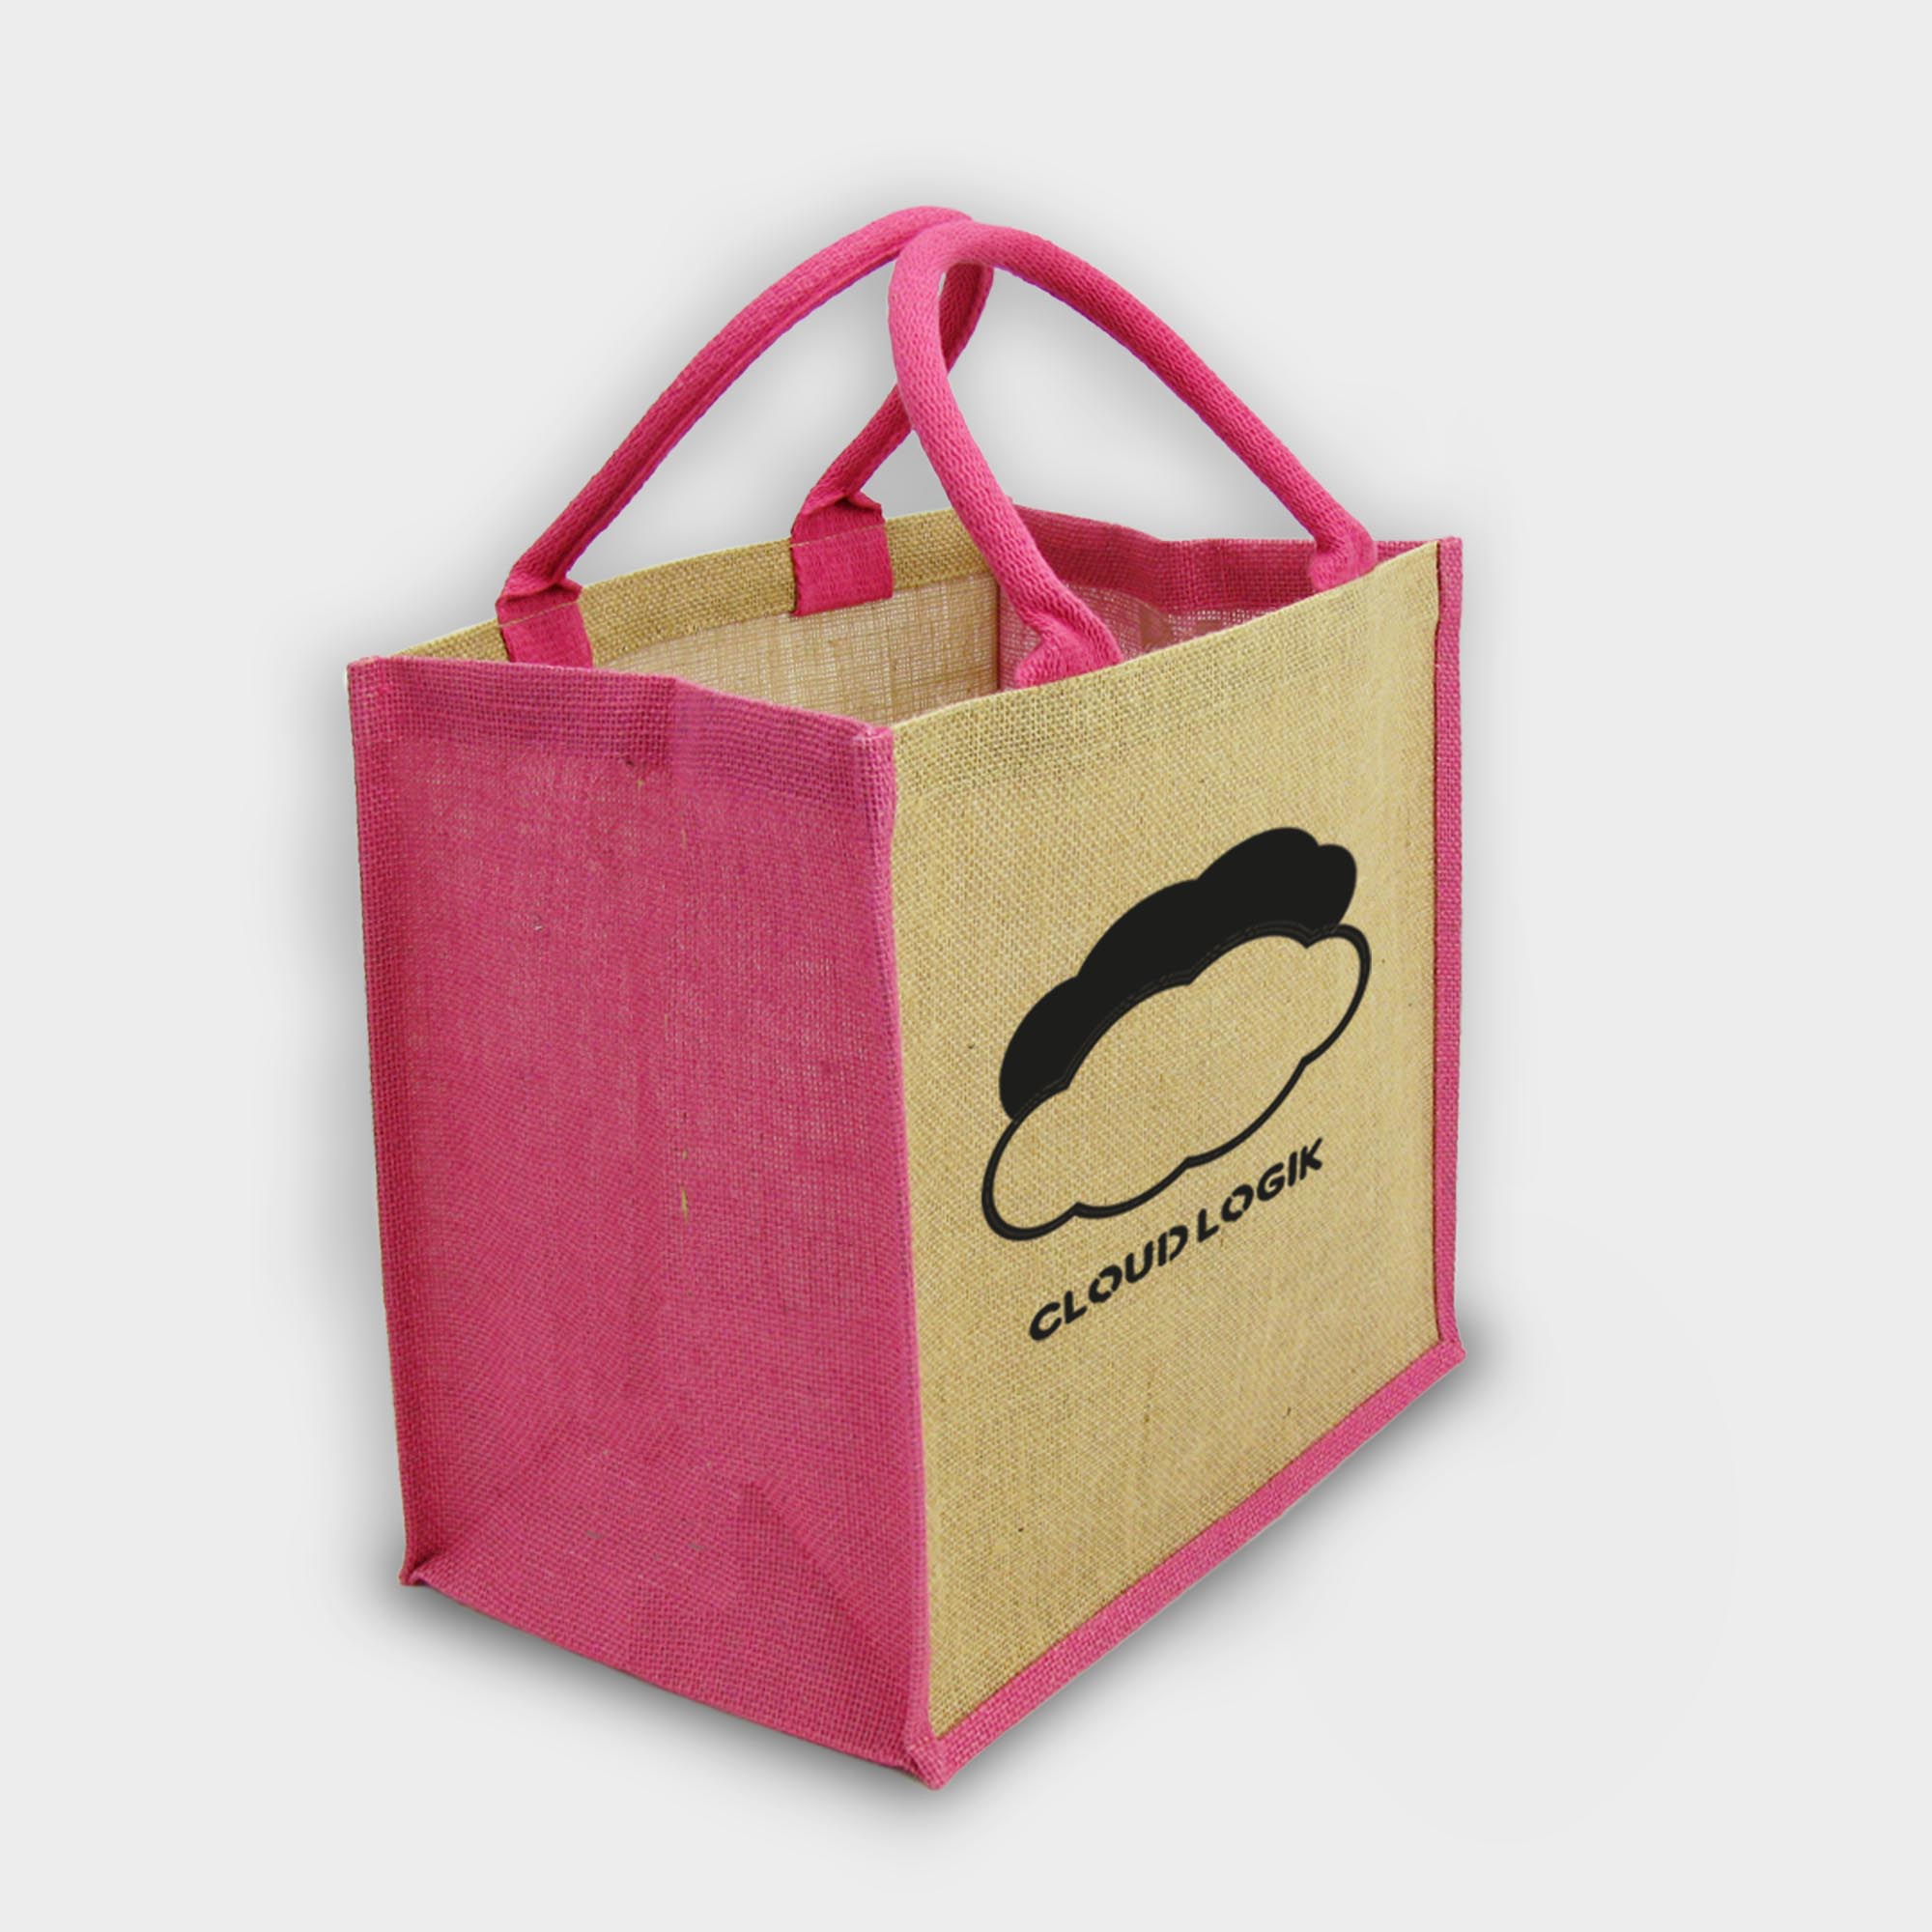 The Green & Good Brighton Jute Bag is made from natural and sustainable jute. Comes with coloured gussets in various colours. Popular shopping and gift bag with square format and cotton webbing over rope handles. Lined inside with a laminated surface for easy cleaning and sturdiness. Natural / Pink